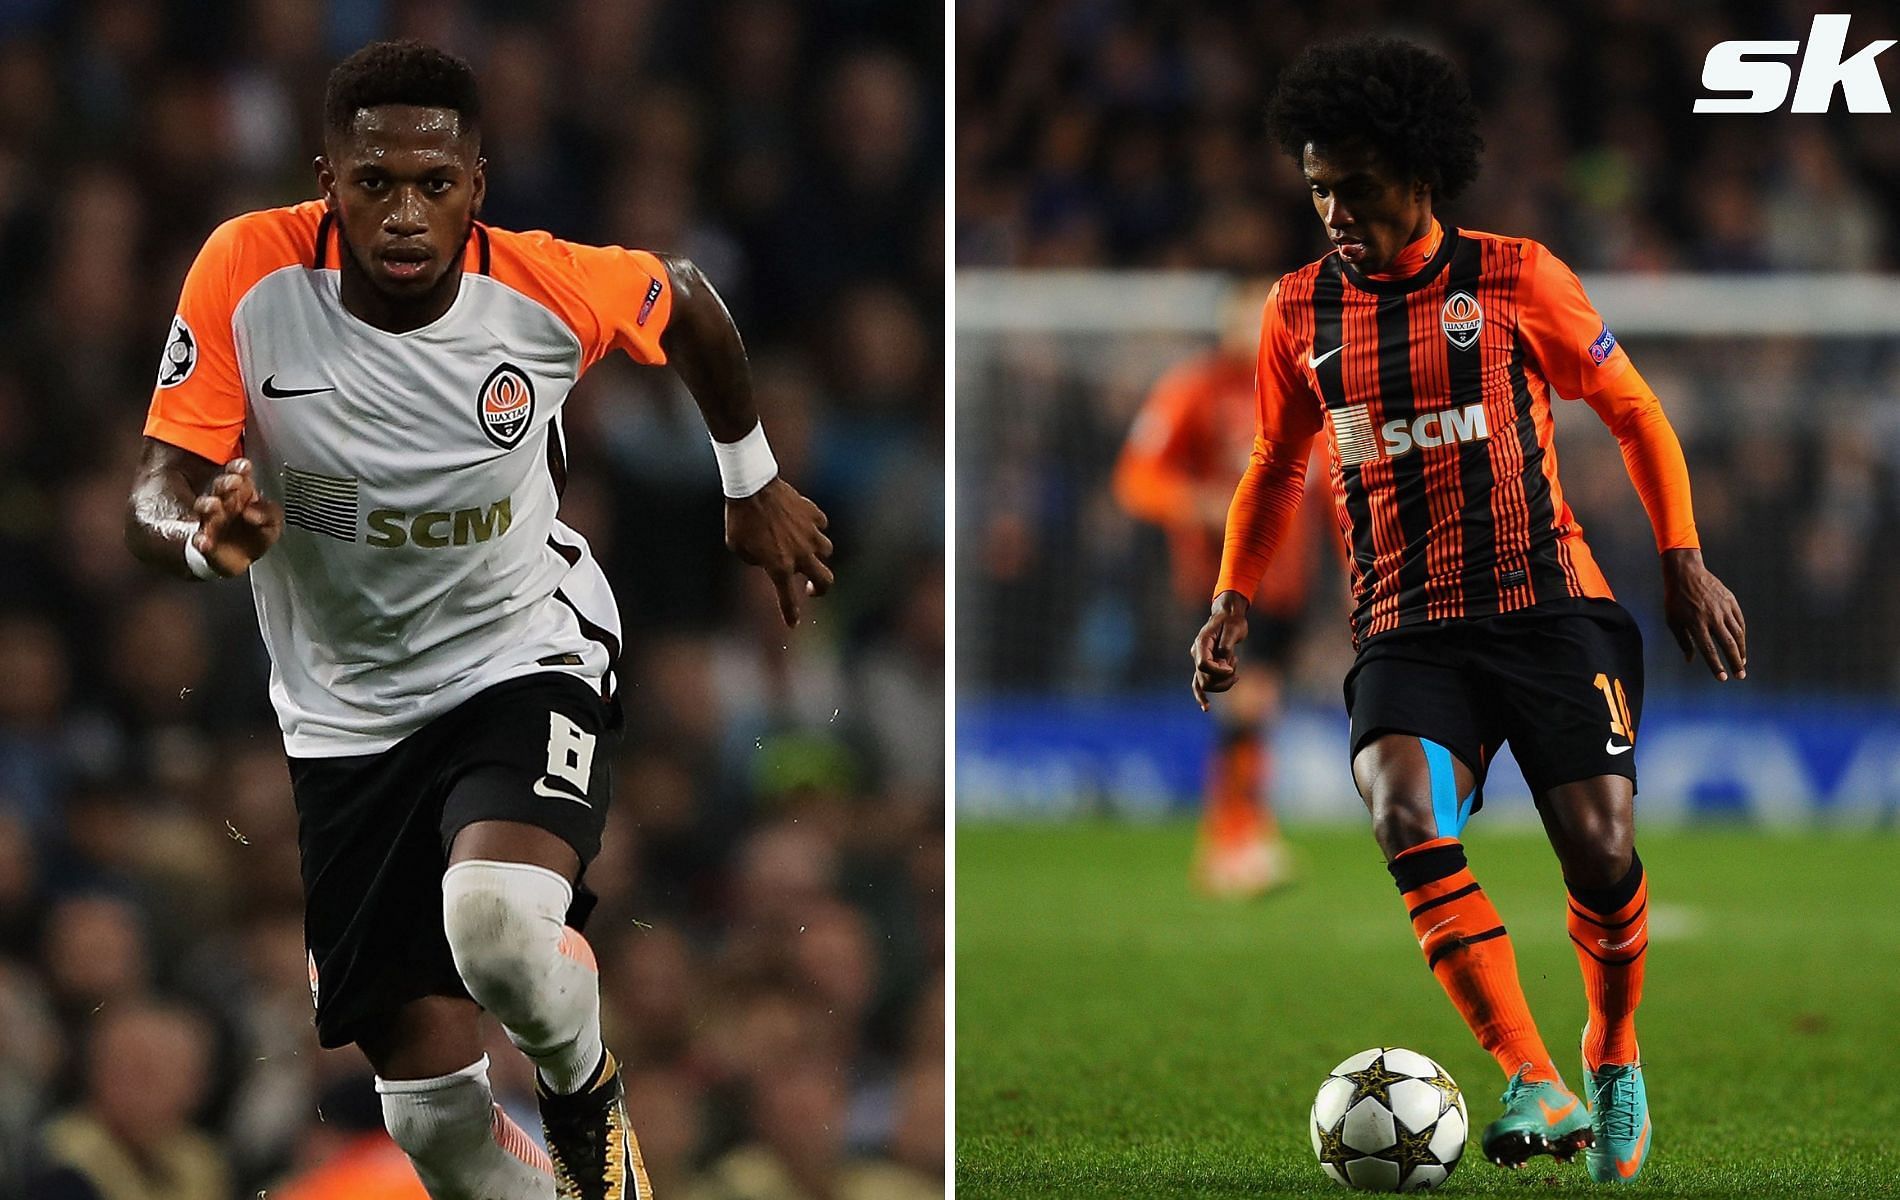 Who fetched the highest transfer fee for Shakhtar Donetsk?